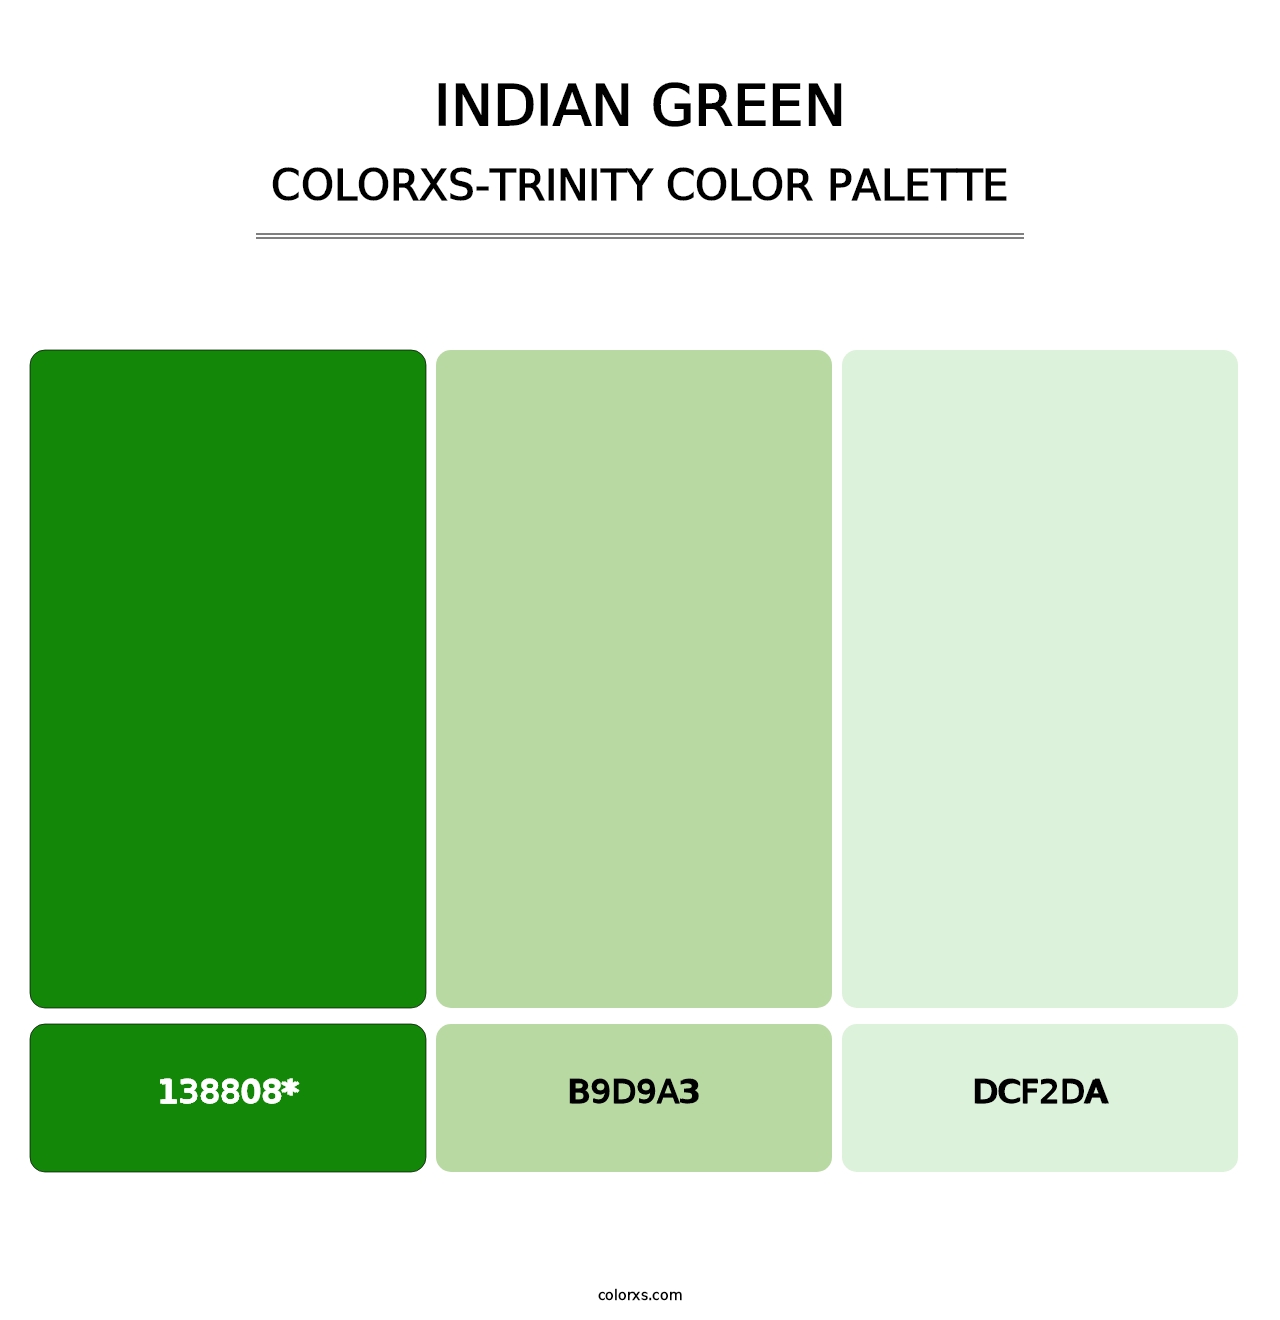 Indian Green - Colorxs Trinity Palette